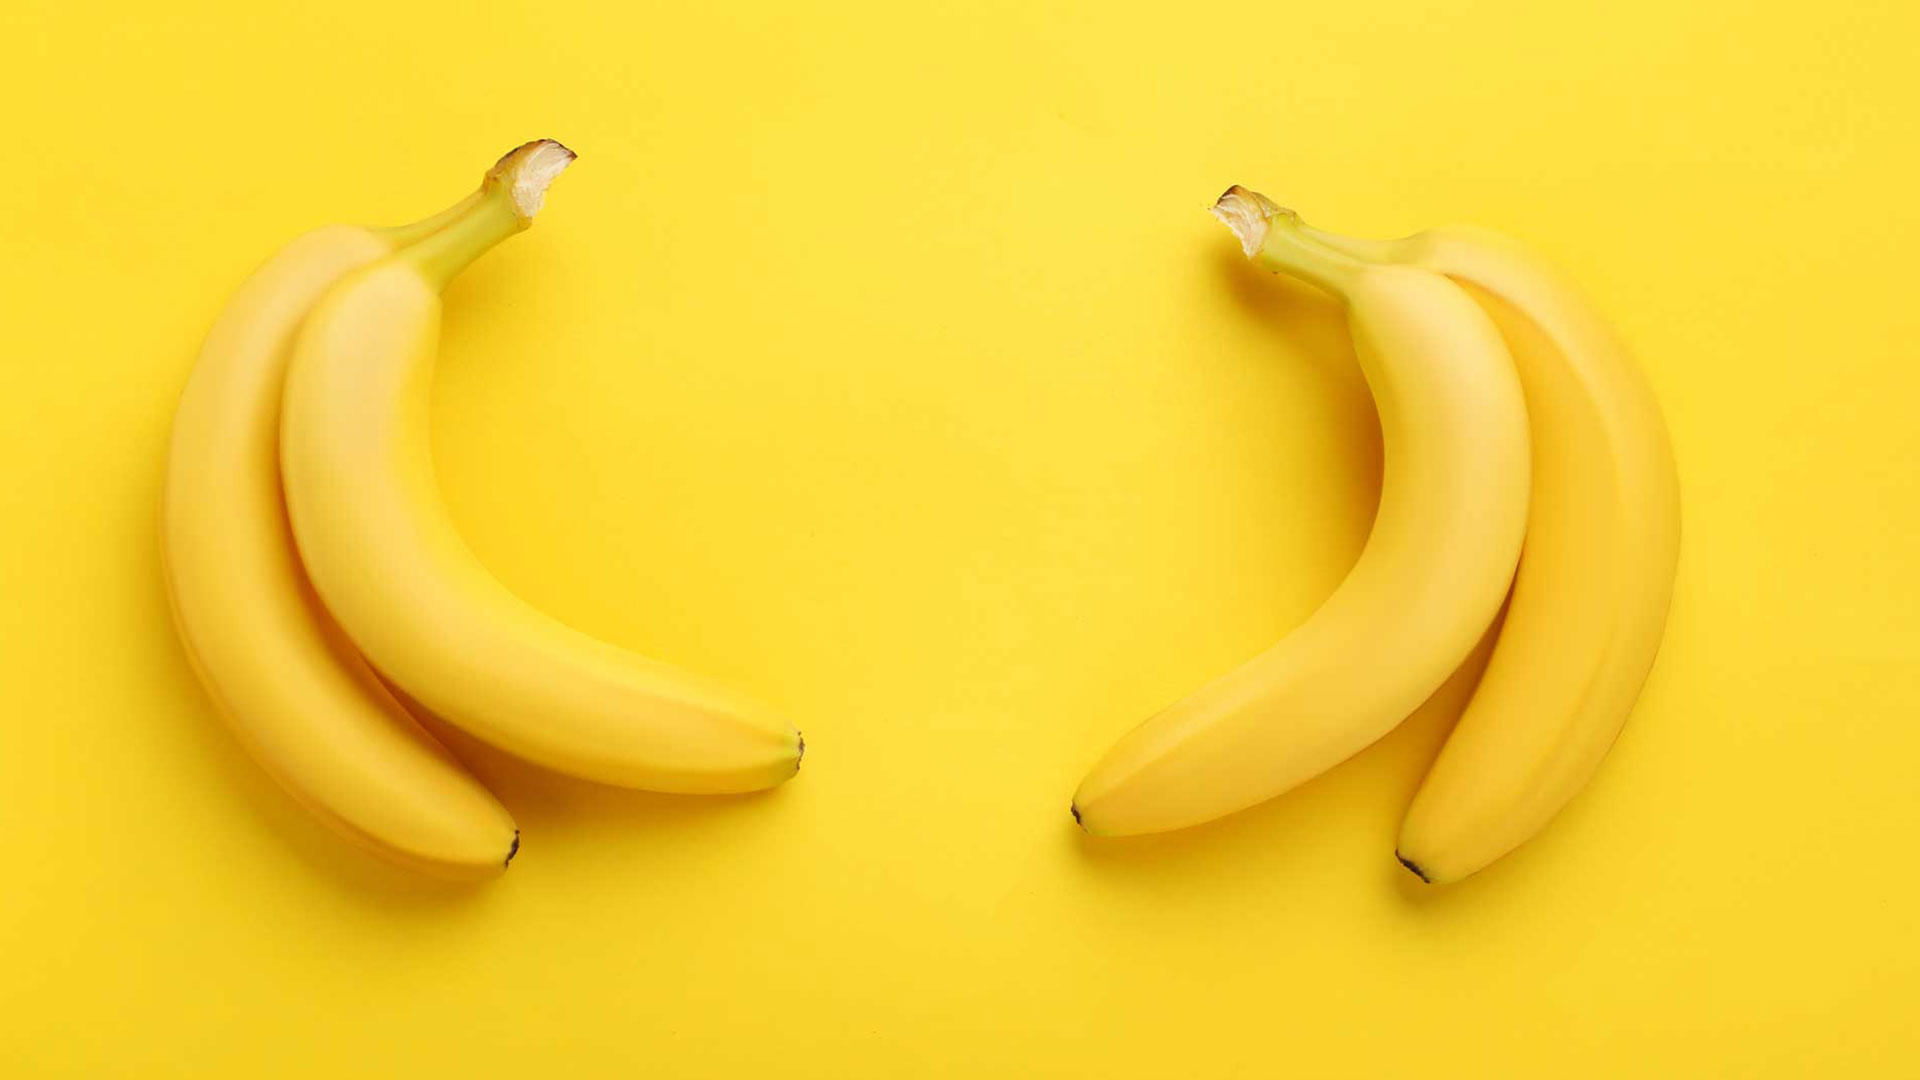 WILL WE SEE THE END OF BANANAS? 11/09/18